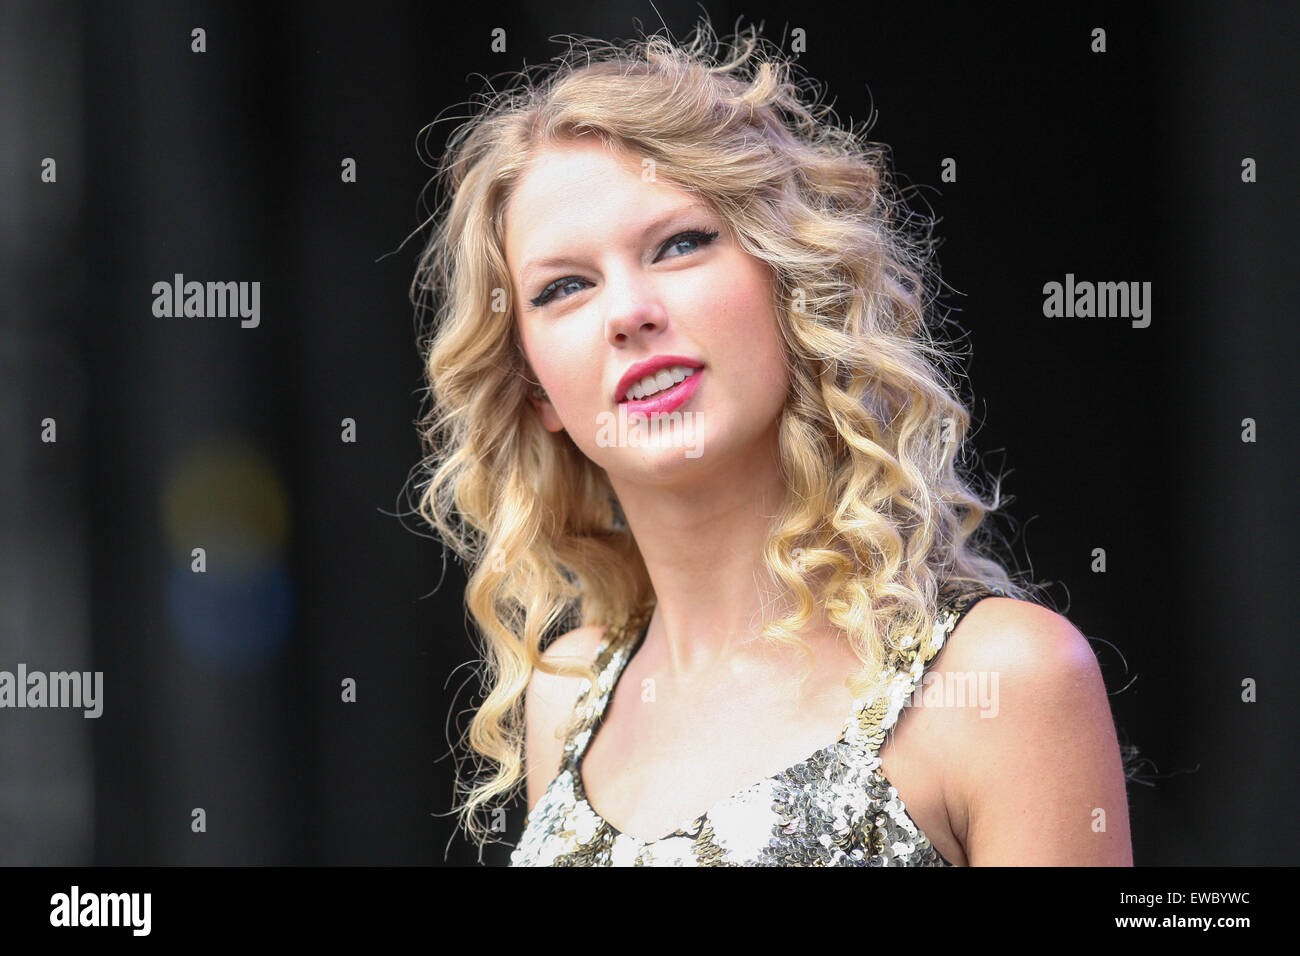 AMERICAN SINGER TAYLOR SWIFT PERFORMING LIVE AT THE V FESTIVAL IN CHELMSFORD,ESSEX,UK. Stock Photo